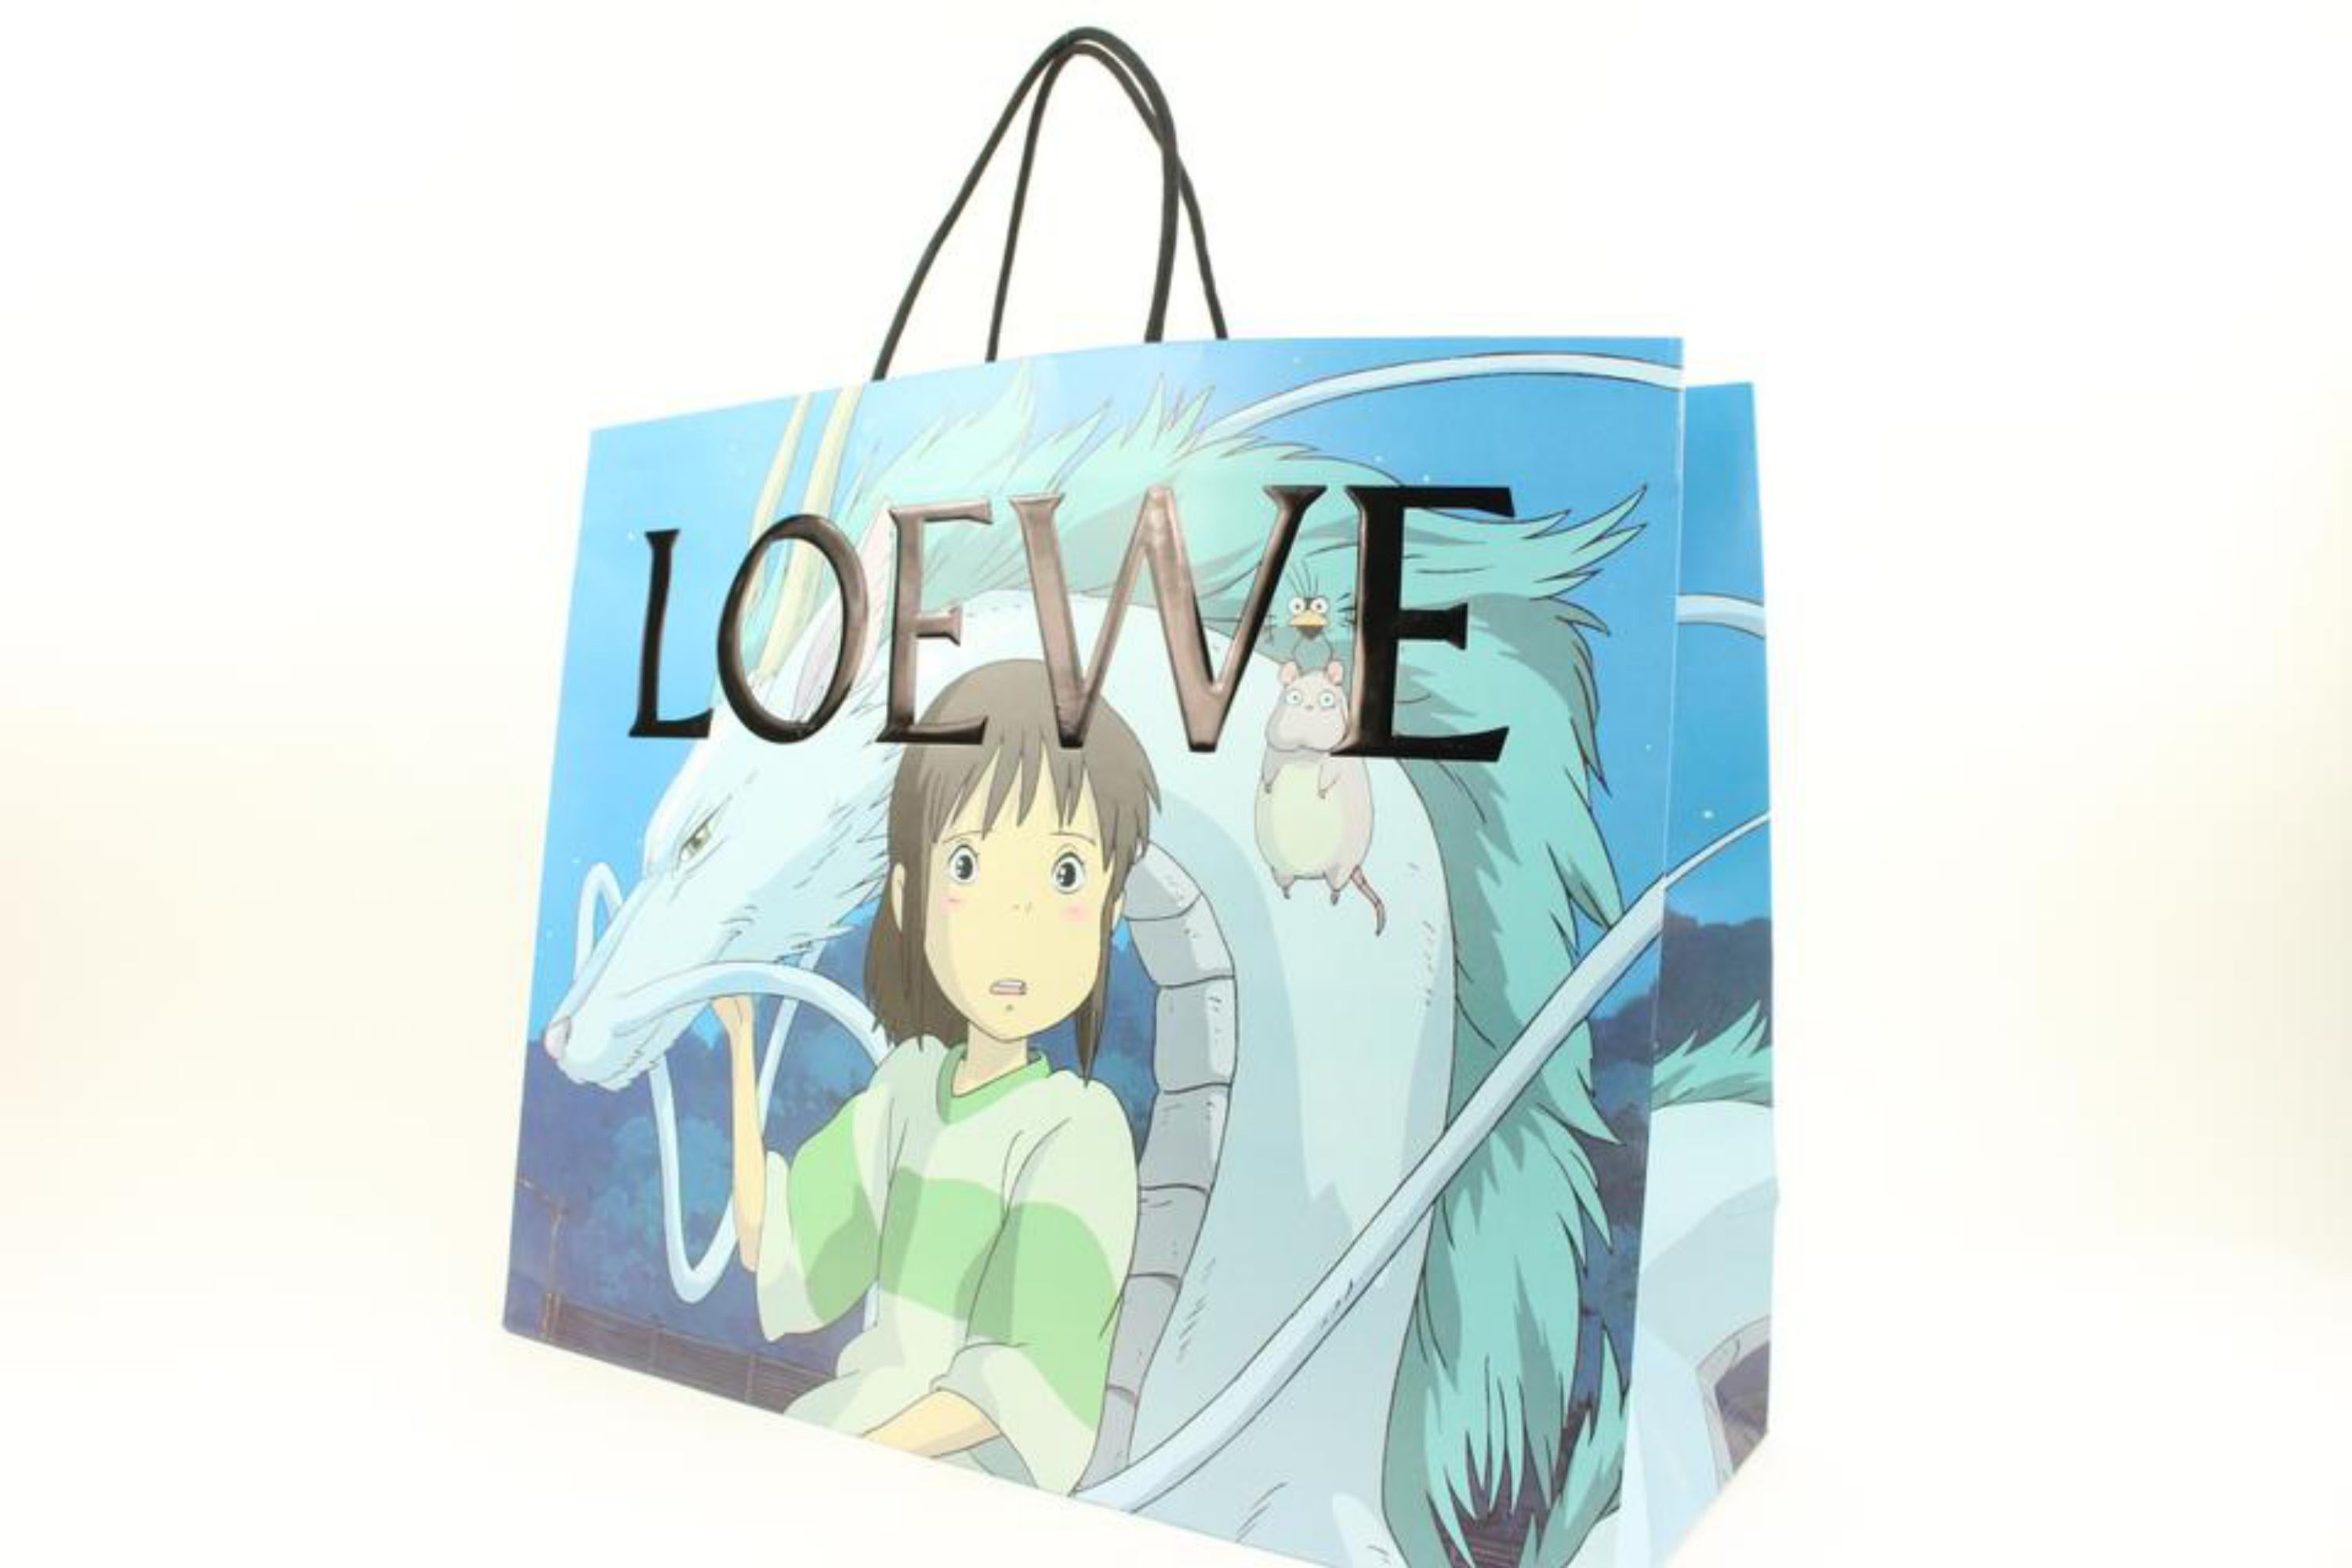 Loewe Limited Spirited Away Shopping Tote Bag 47lo37s
Made In: Indonesia
Measurements: Length:  20